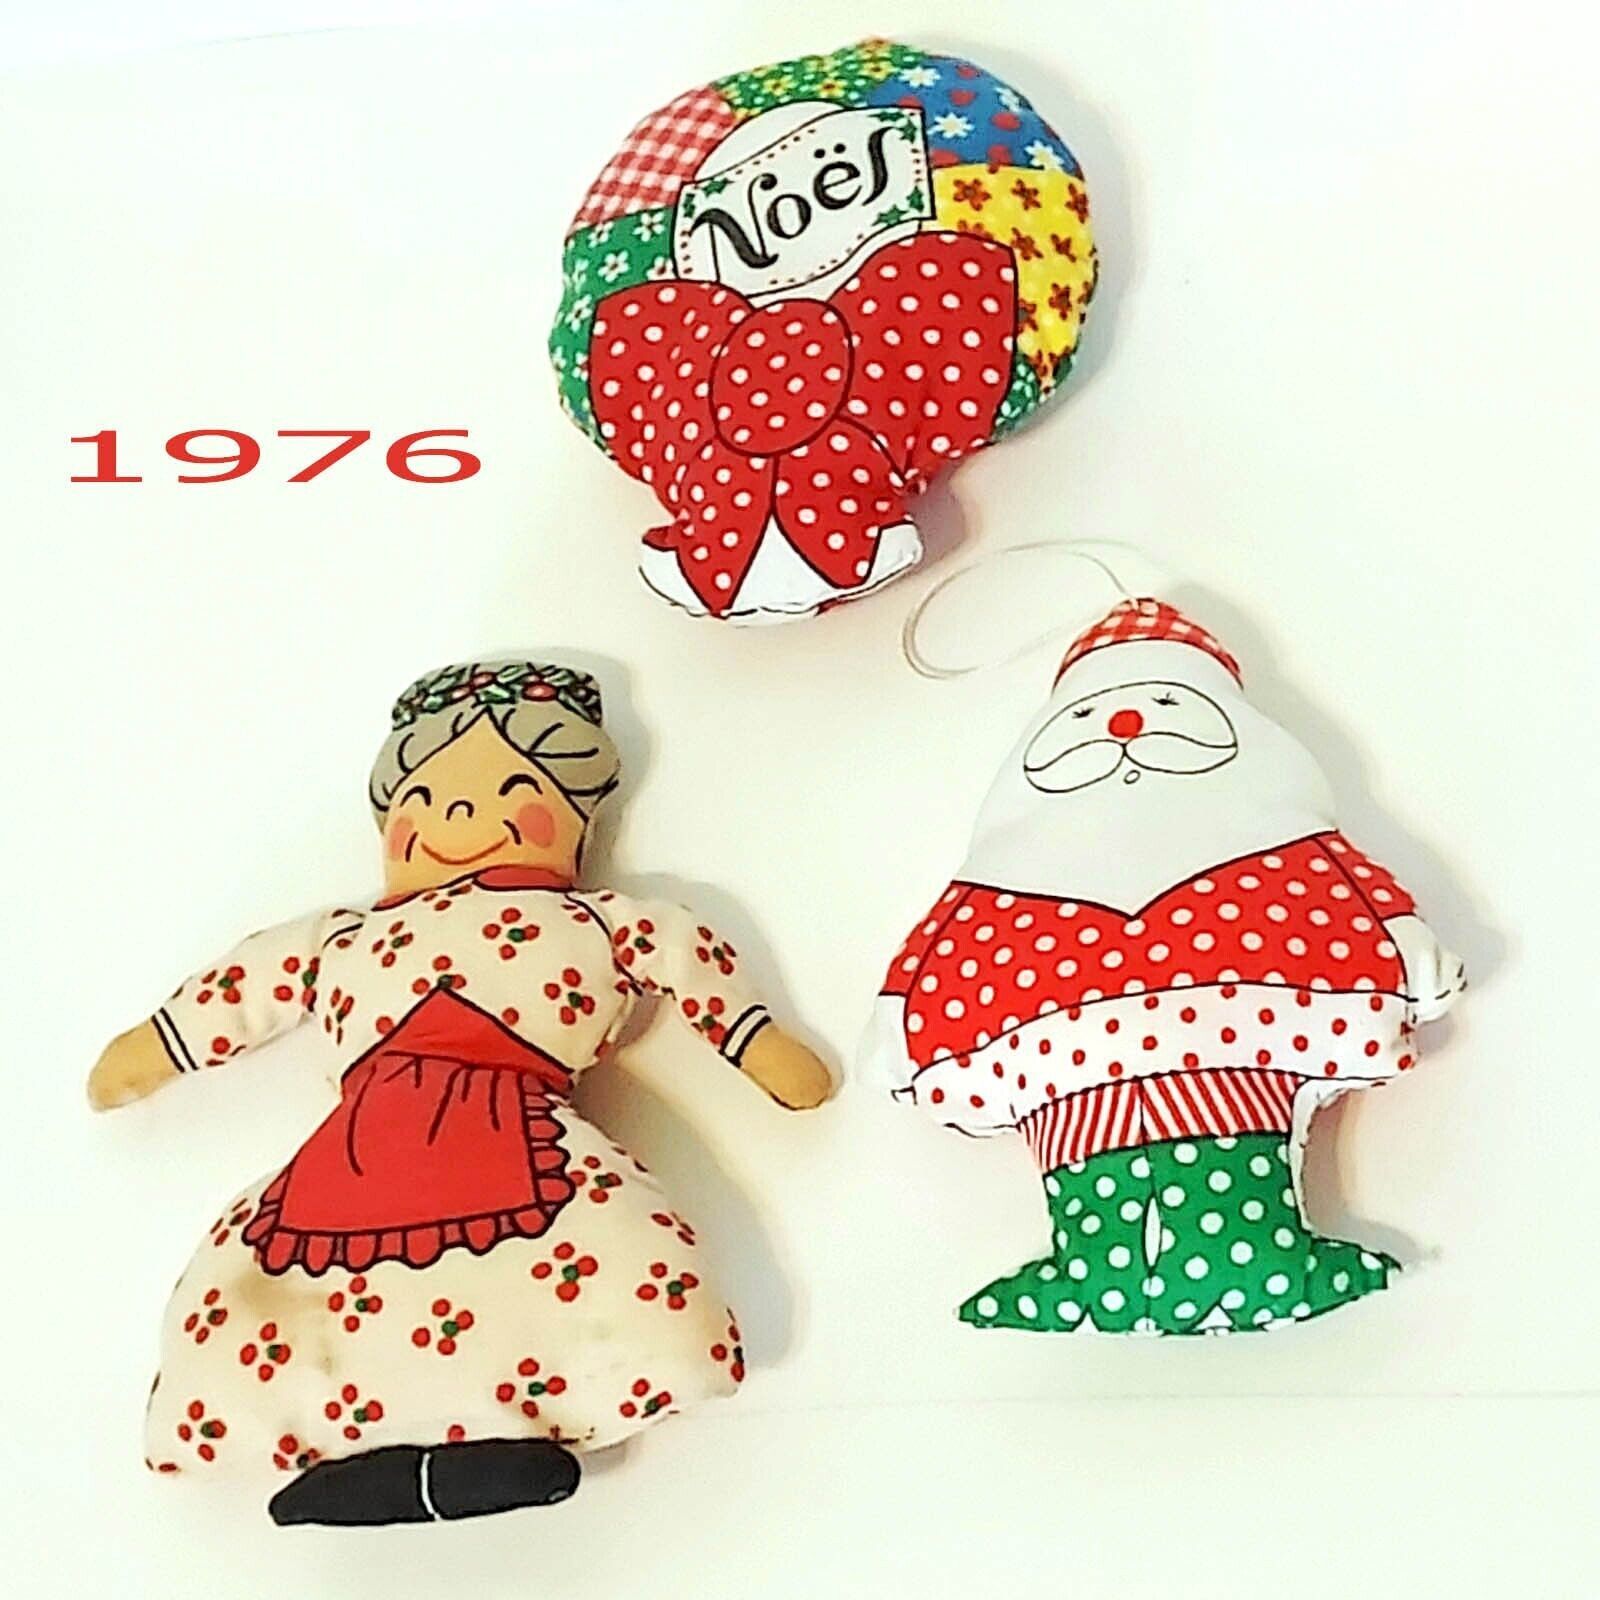 Primary image for Handmade Christmas Stuffed Ornaments 1976 Retro Child Friendly